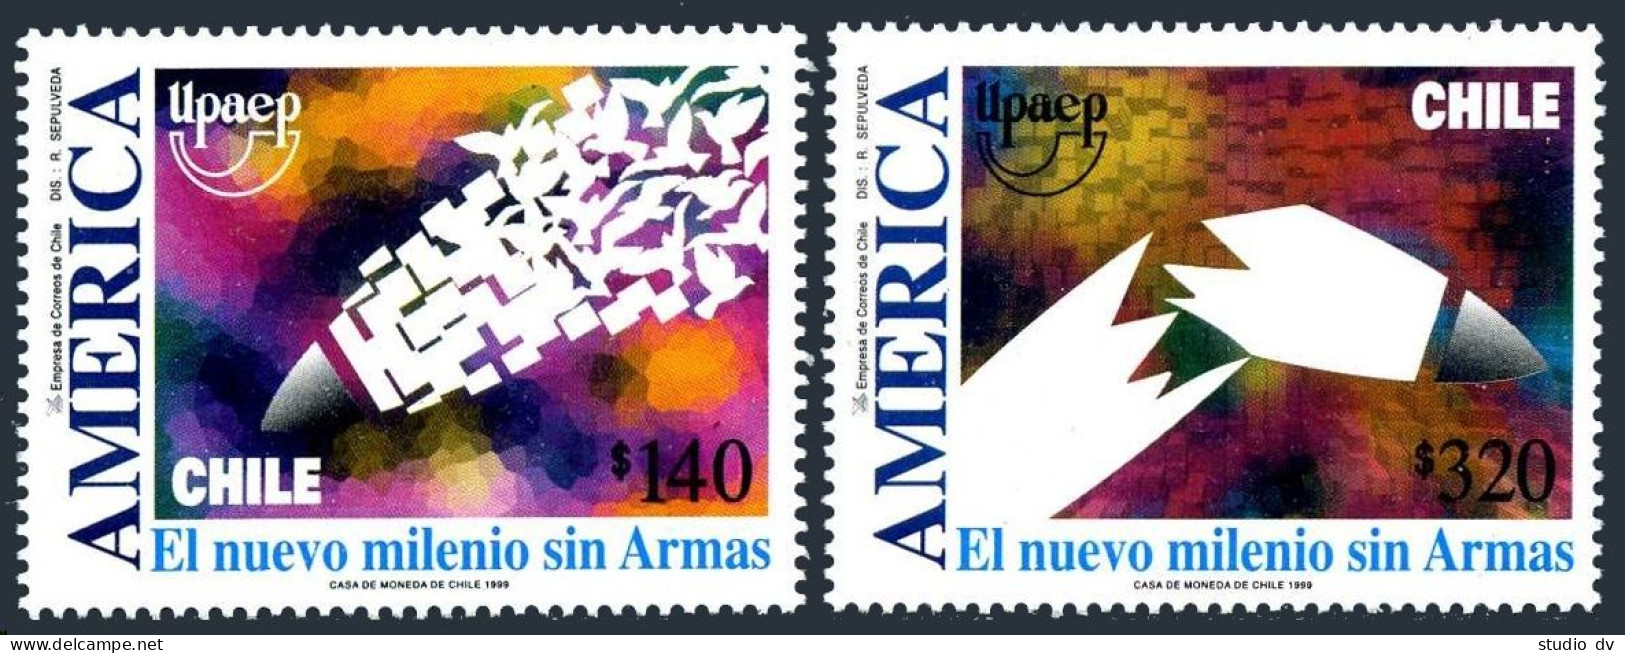 Chile 1304-1305,MNH. America UPAEP-1999.New Millennium Without Arms.Broken Bomb. - Chile